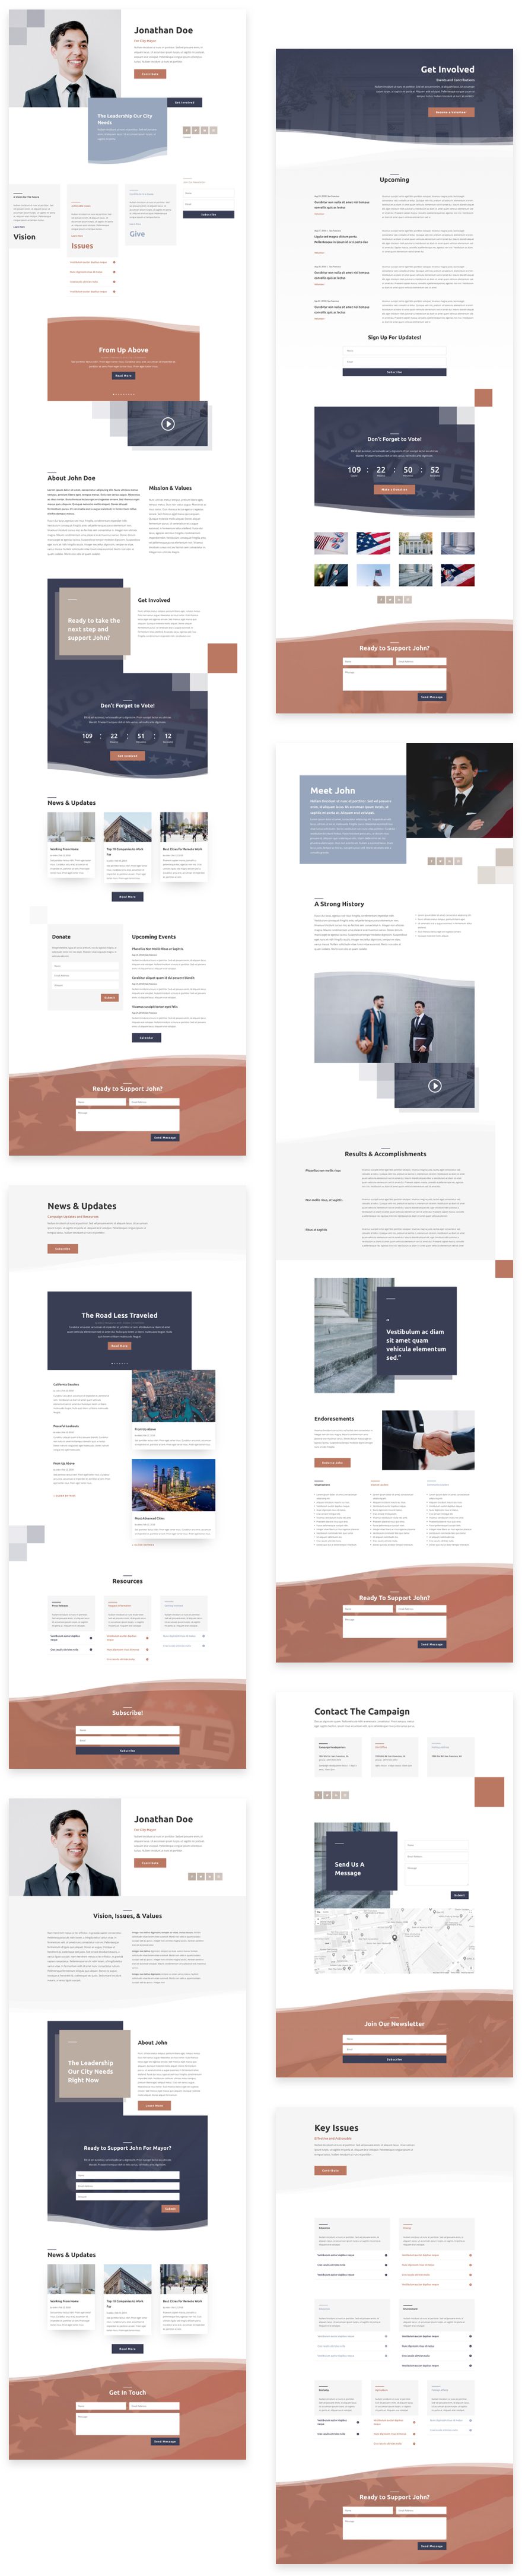 Get A FREE Political Candidate Layout Pack For Divi